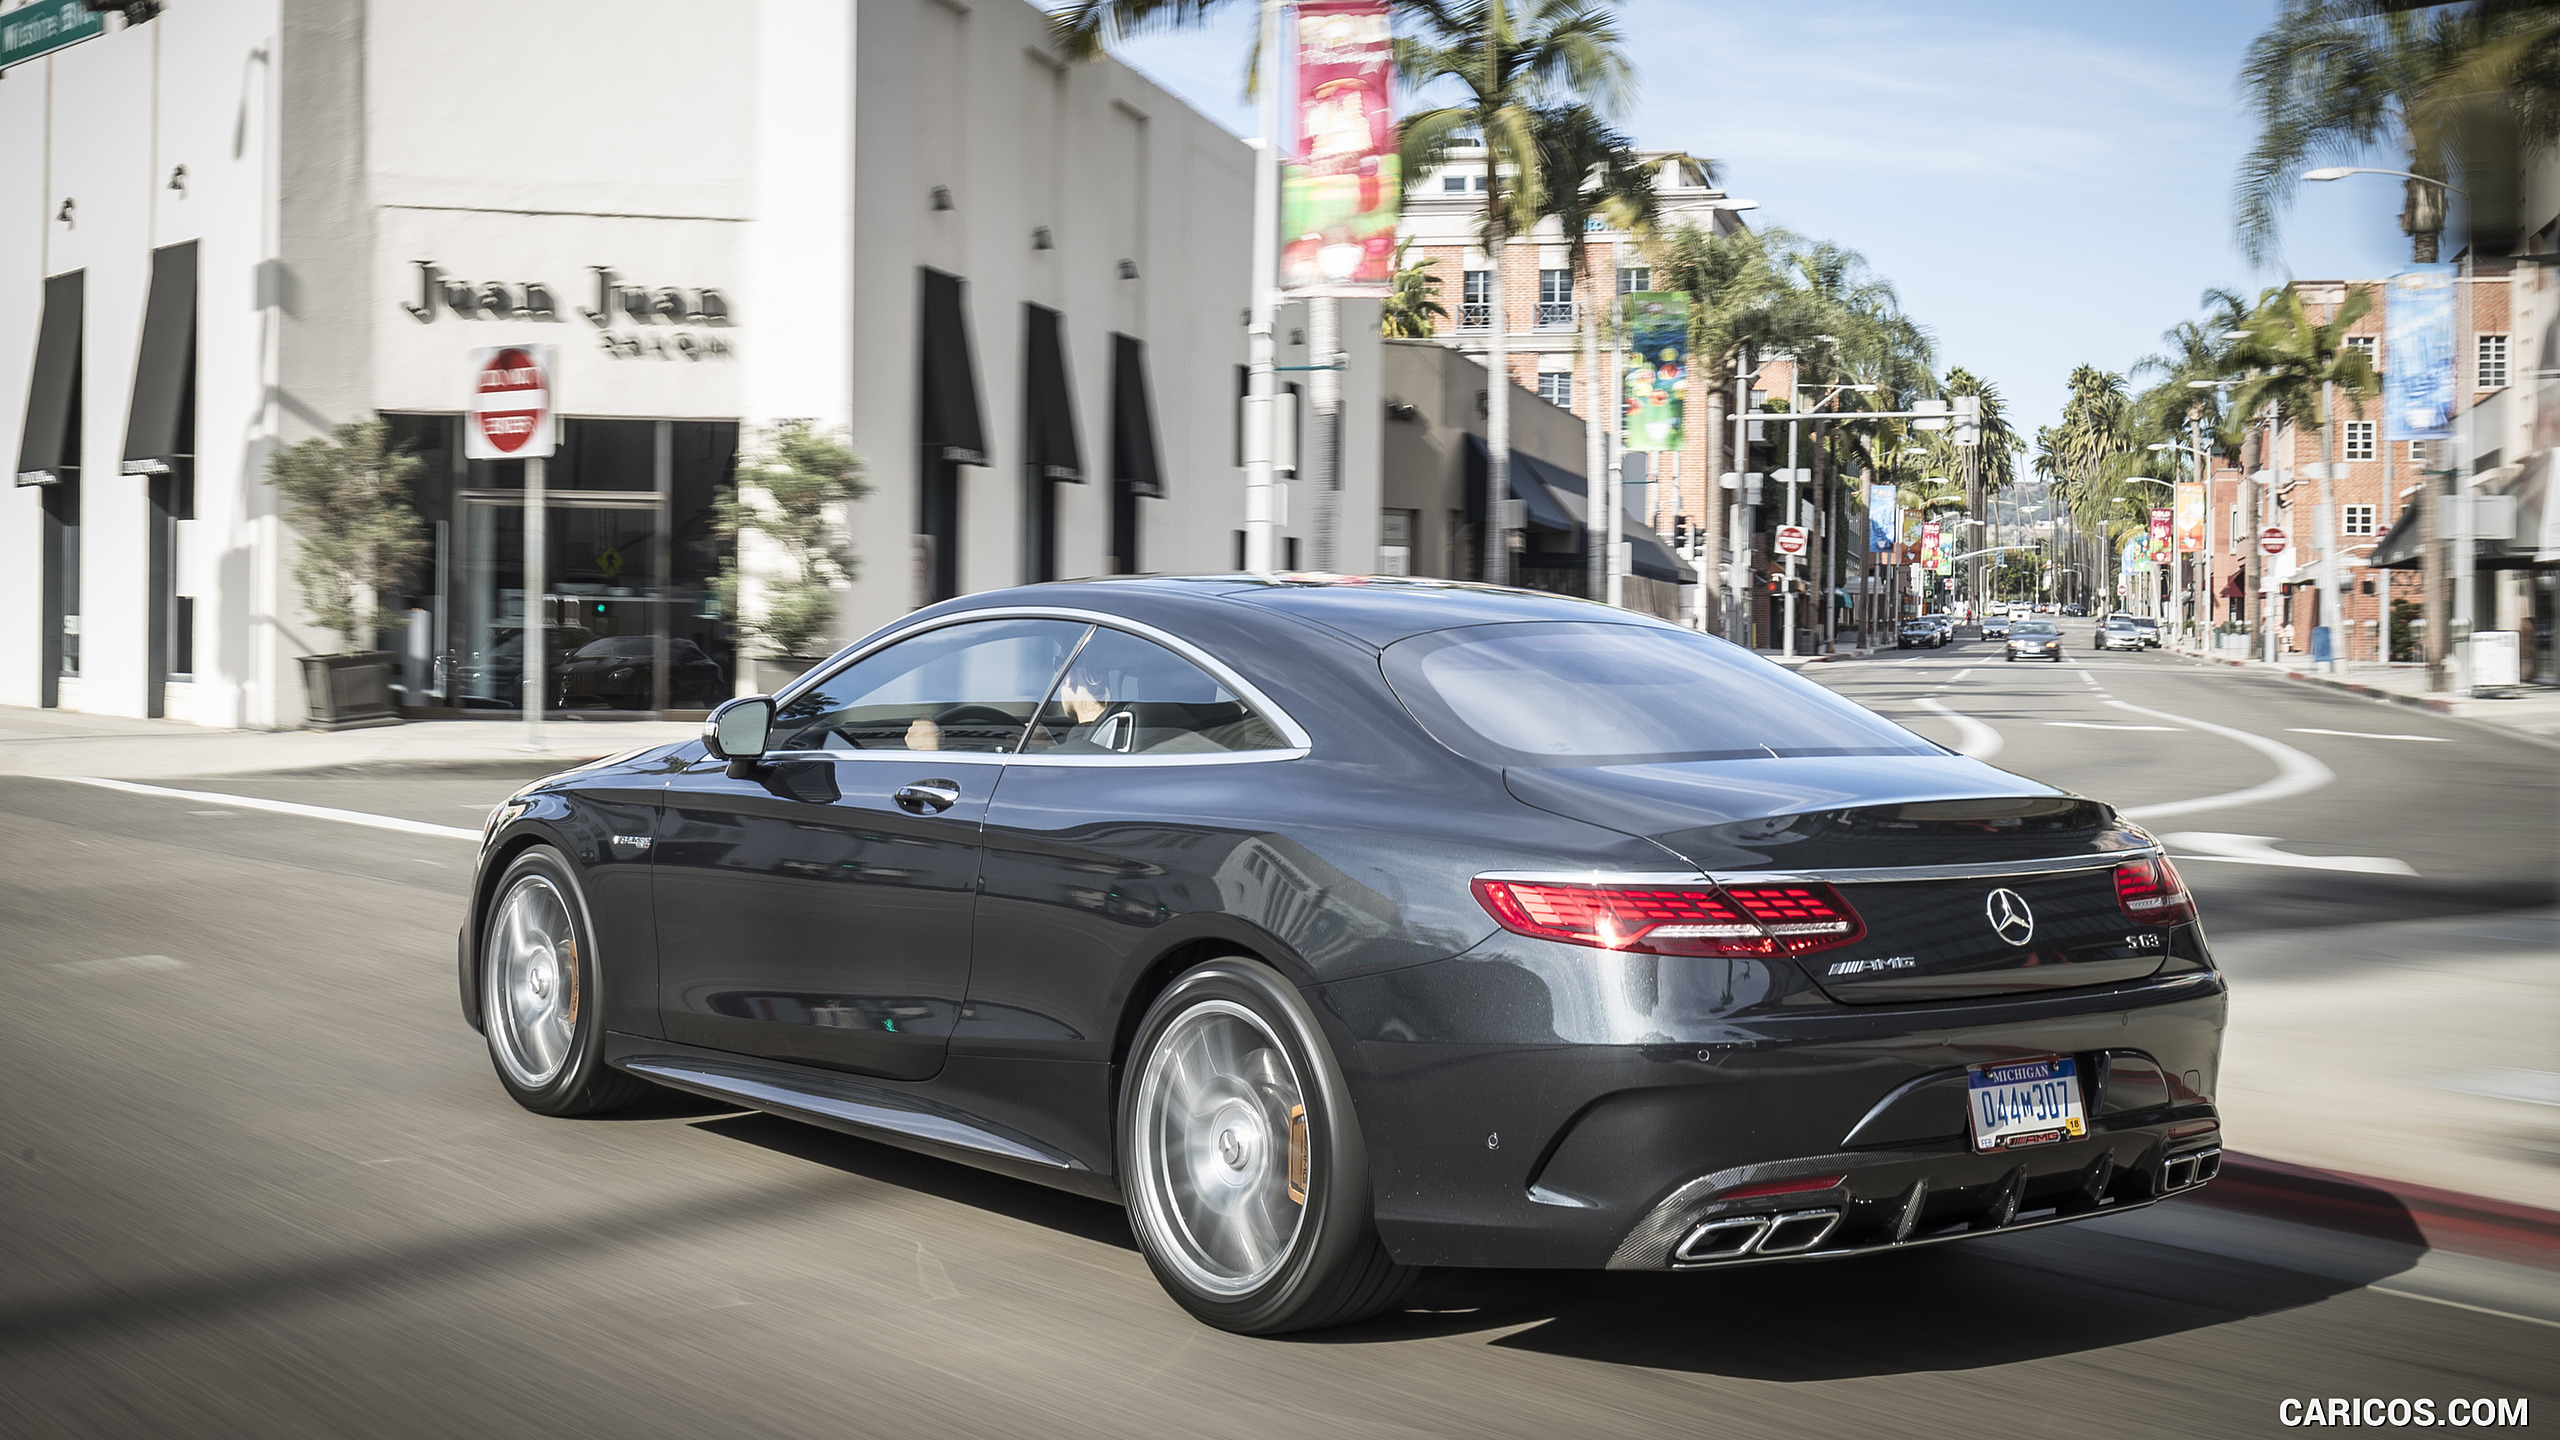 2018 Mercedes-AMG S63 Coupe (US-Spec) - Rear Three-Quarter, #47 of 98